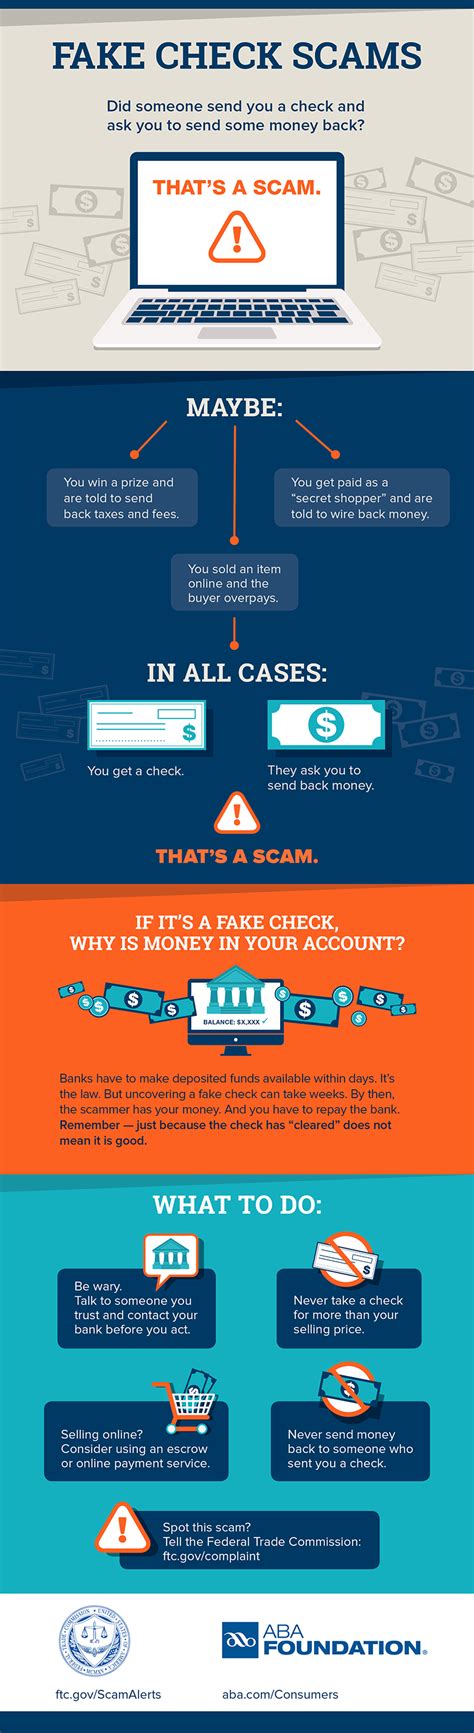 fake check scams infographic consumer information